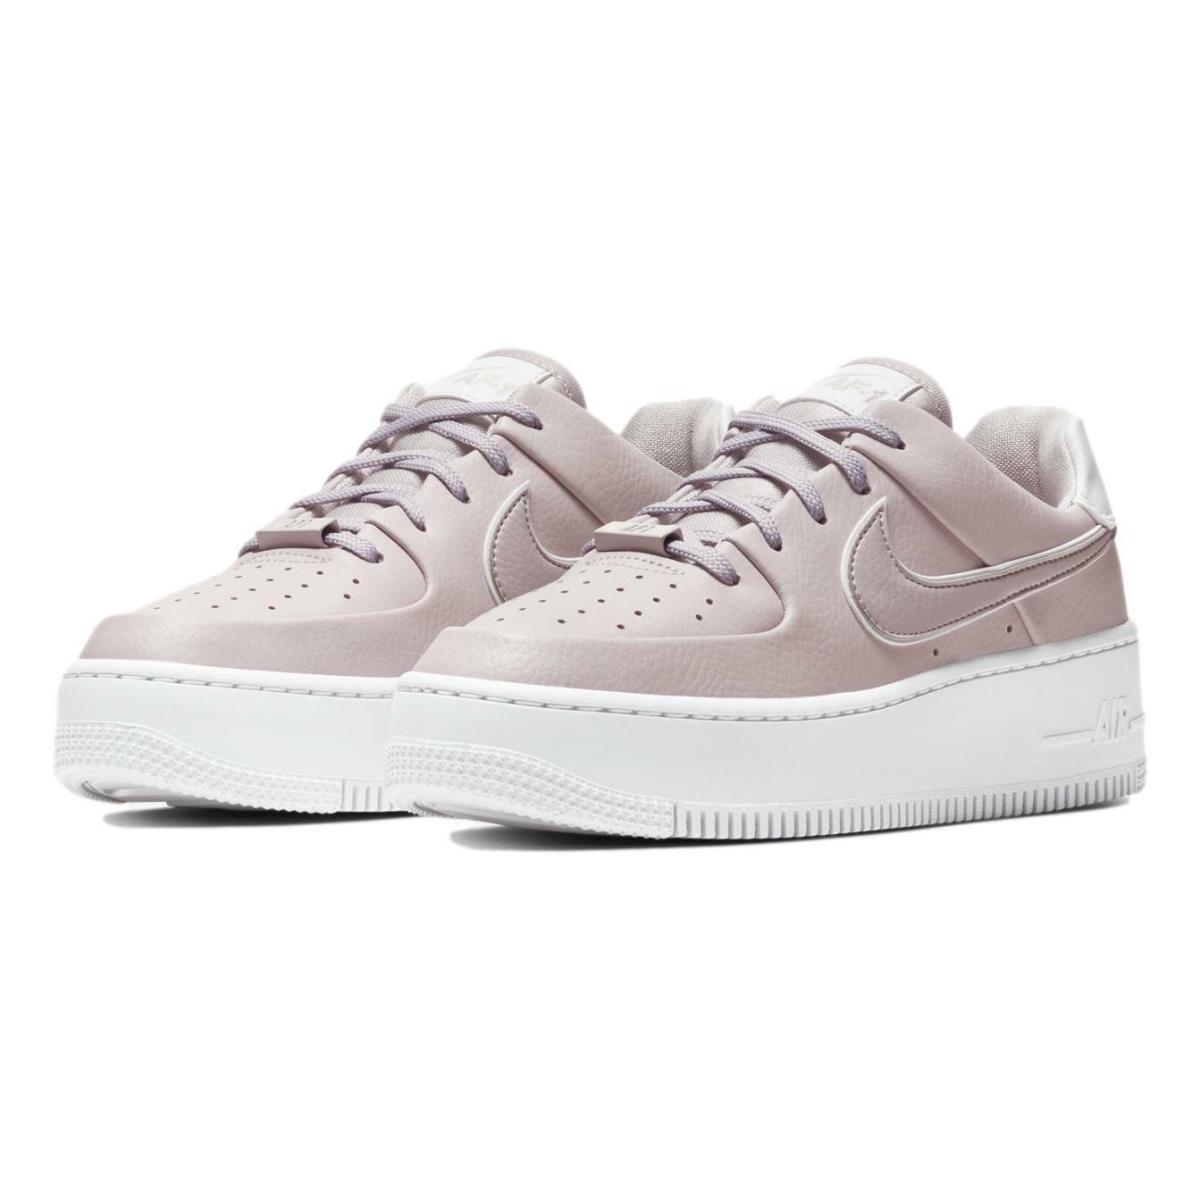 Nike Air Force 1 Sage Low Women`s Shoes Sneakers Platinum Violet/white CJ1642